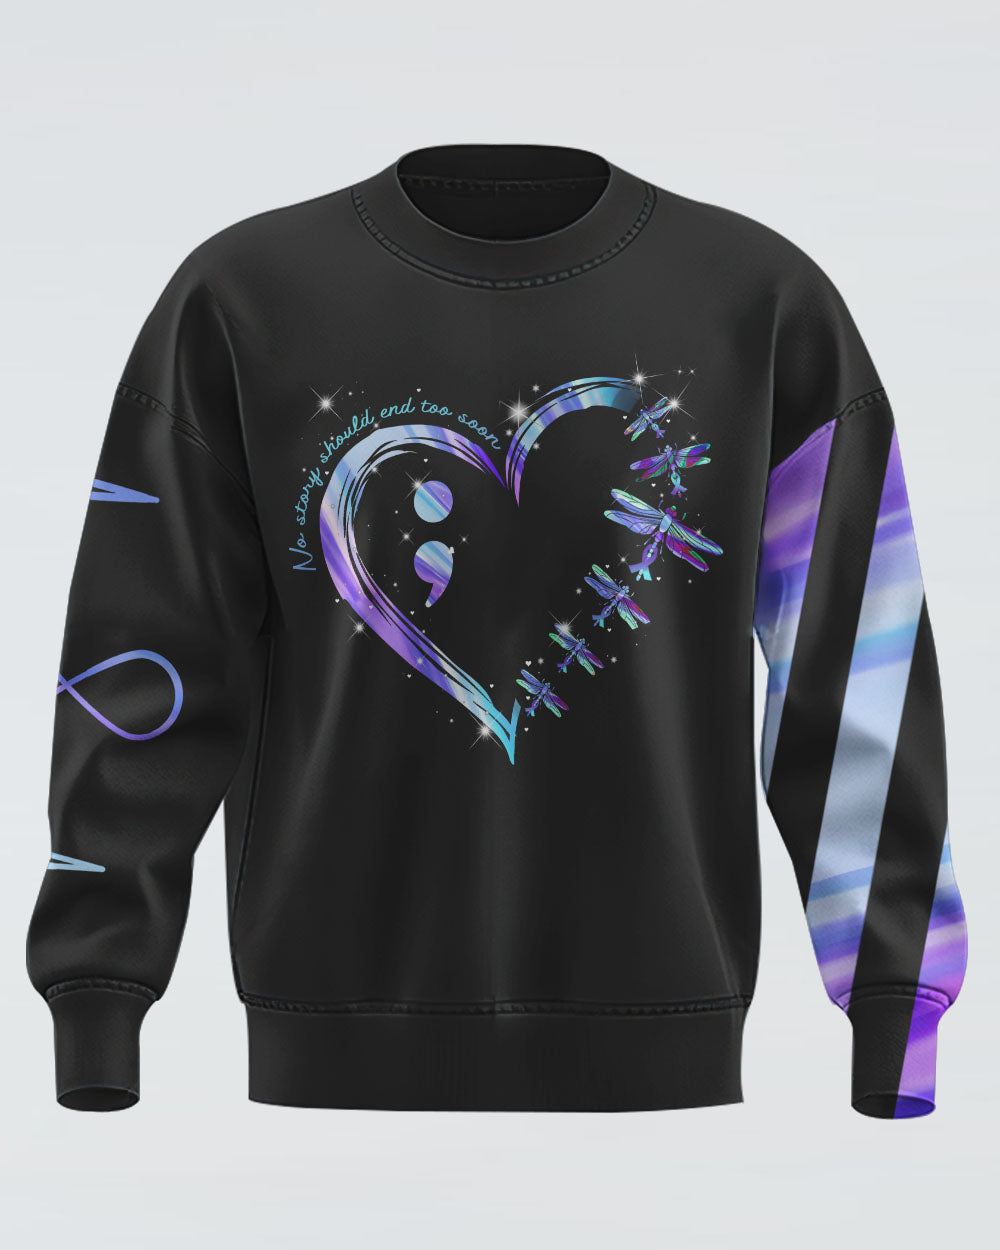 Dragonfly Fight Holographic Flag Women's Suicide Prevention Awareness Sweatshirt